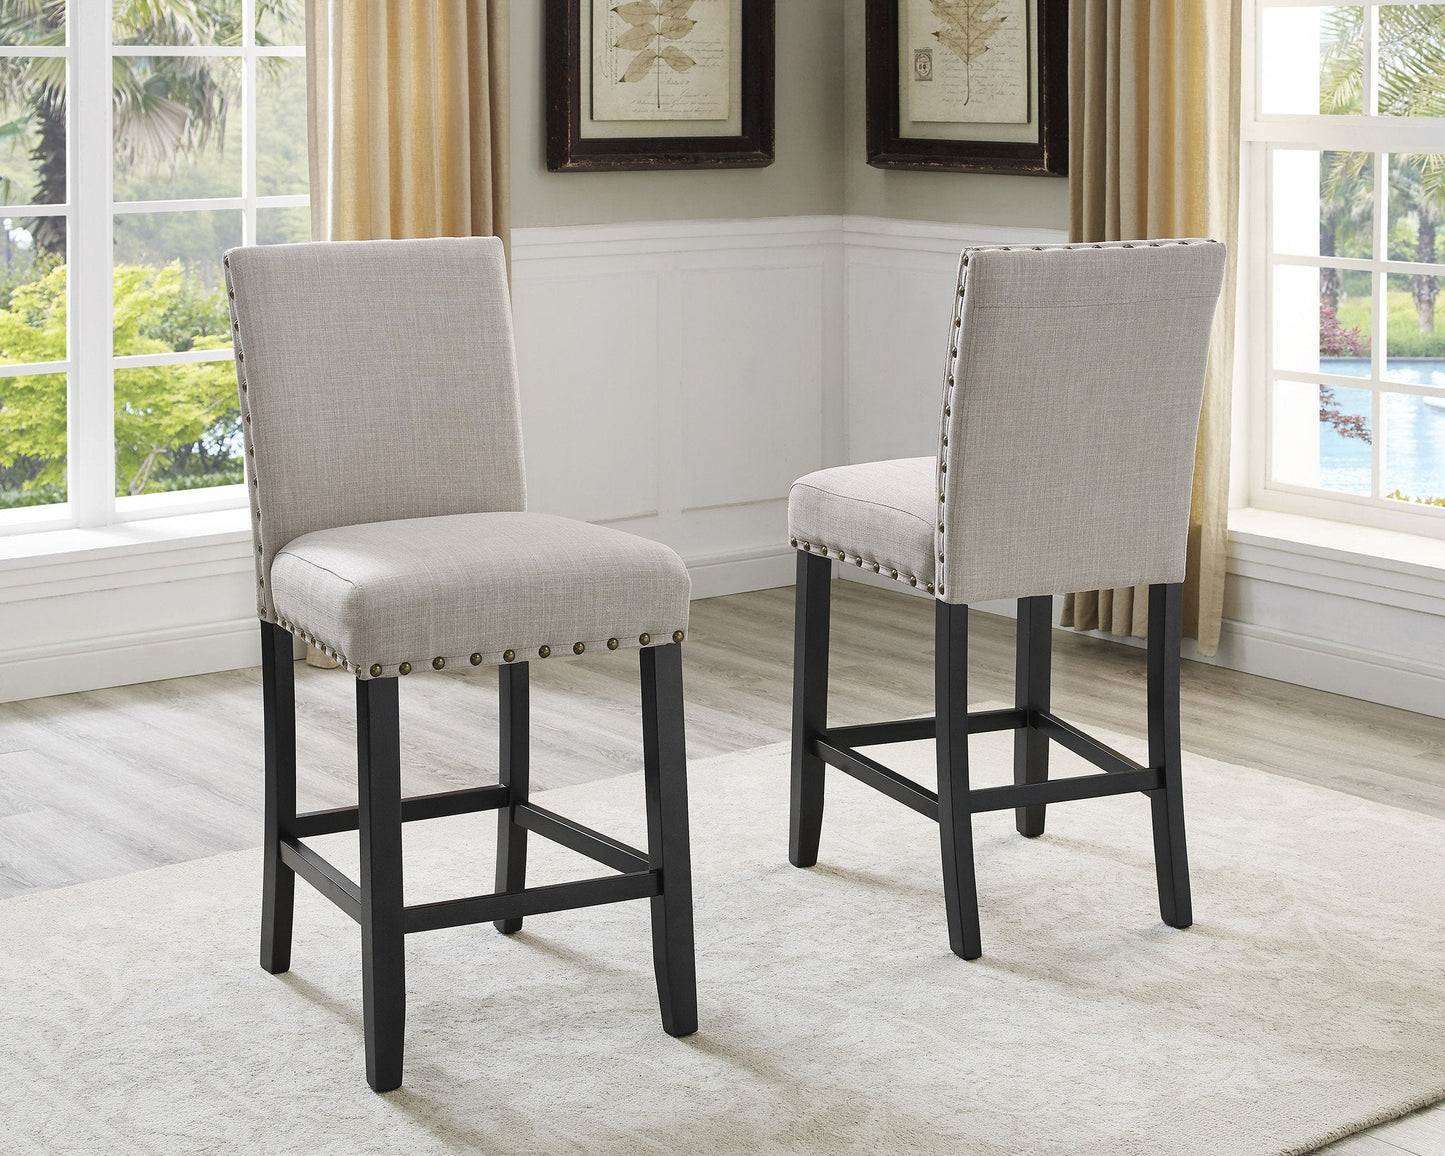 Biony Espresso Wood Counter Height Dining Set with Tan Fabric Nailhead Stools